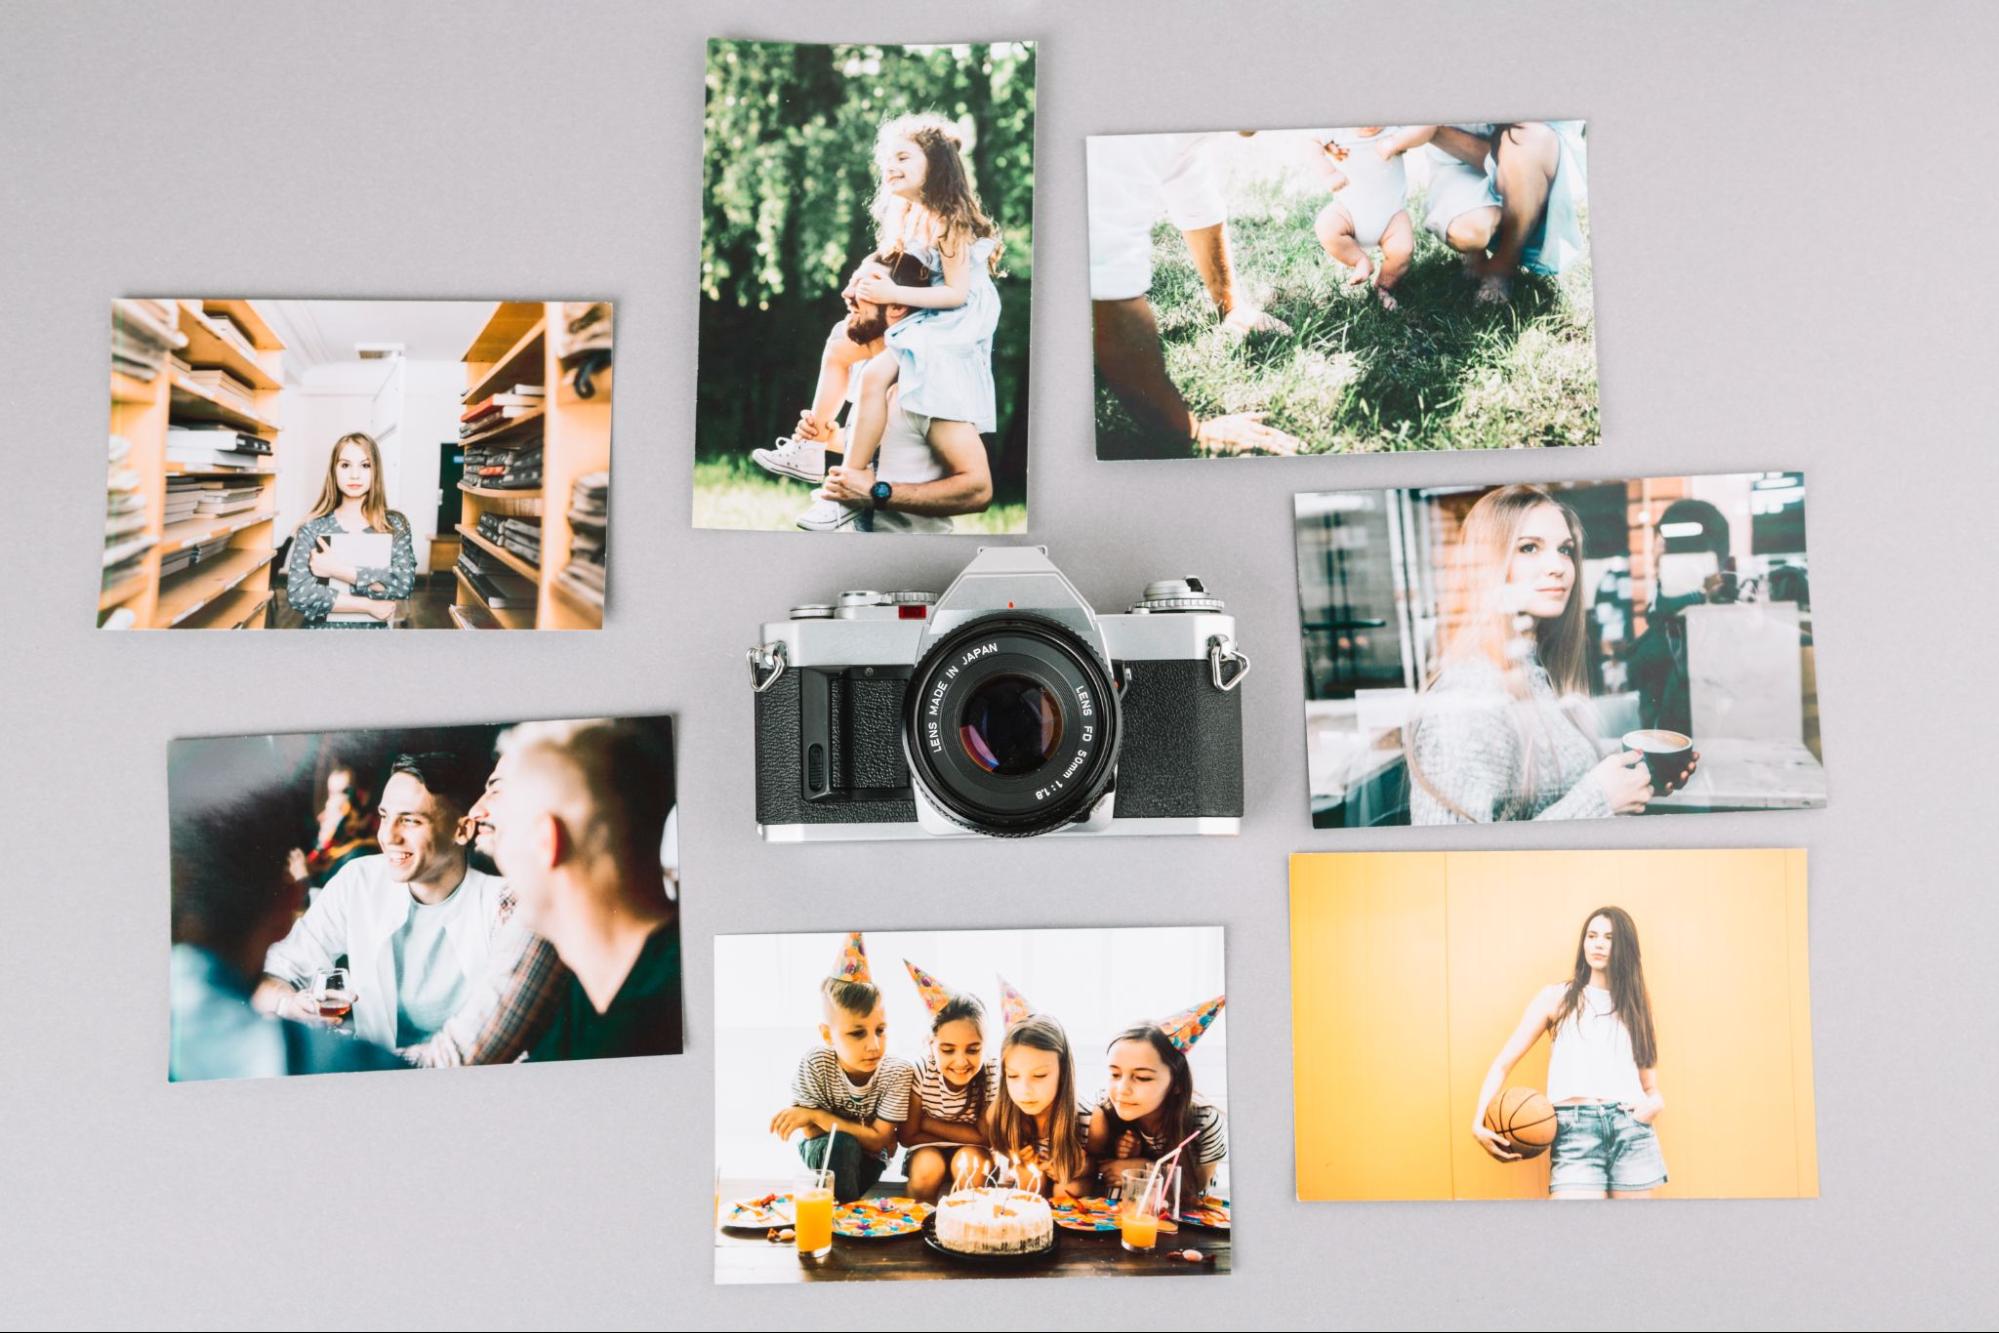 DIY Photo Wall: Capture Memories and Make Your Birthday Celebration Extra Special at Home